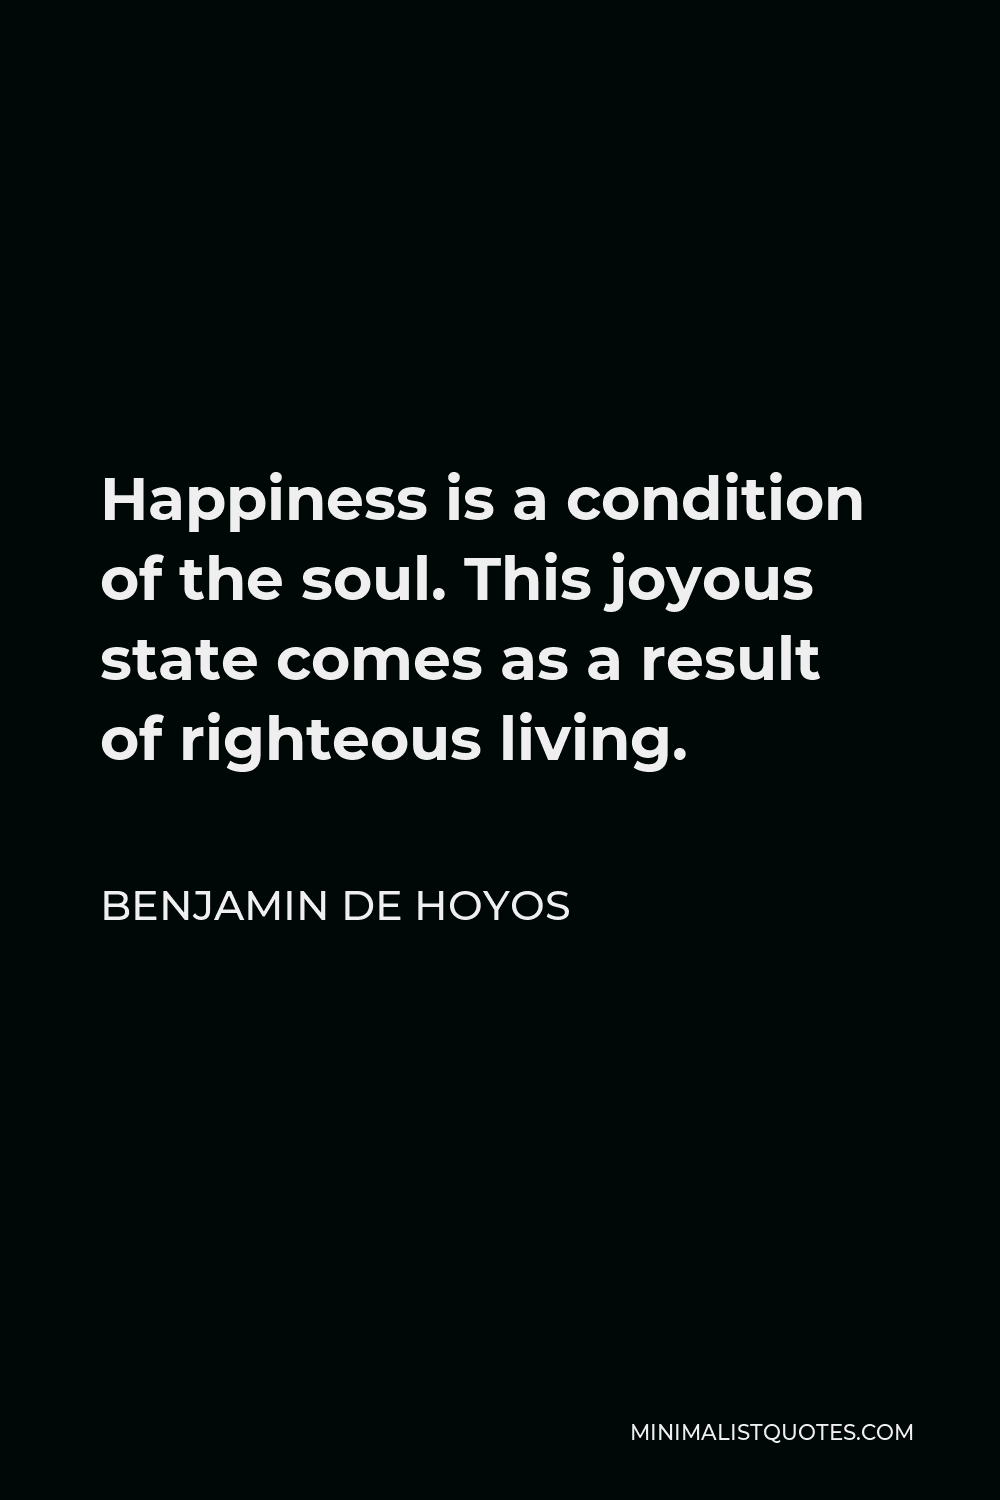 Benjamin De Hoyos Quote - Happiness is a condition of the soul. This joyous state comes as a result of righteous living.